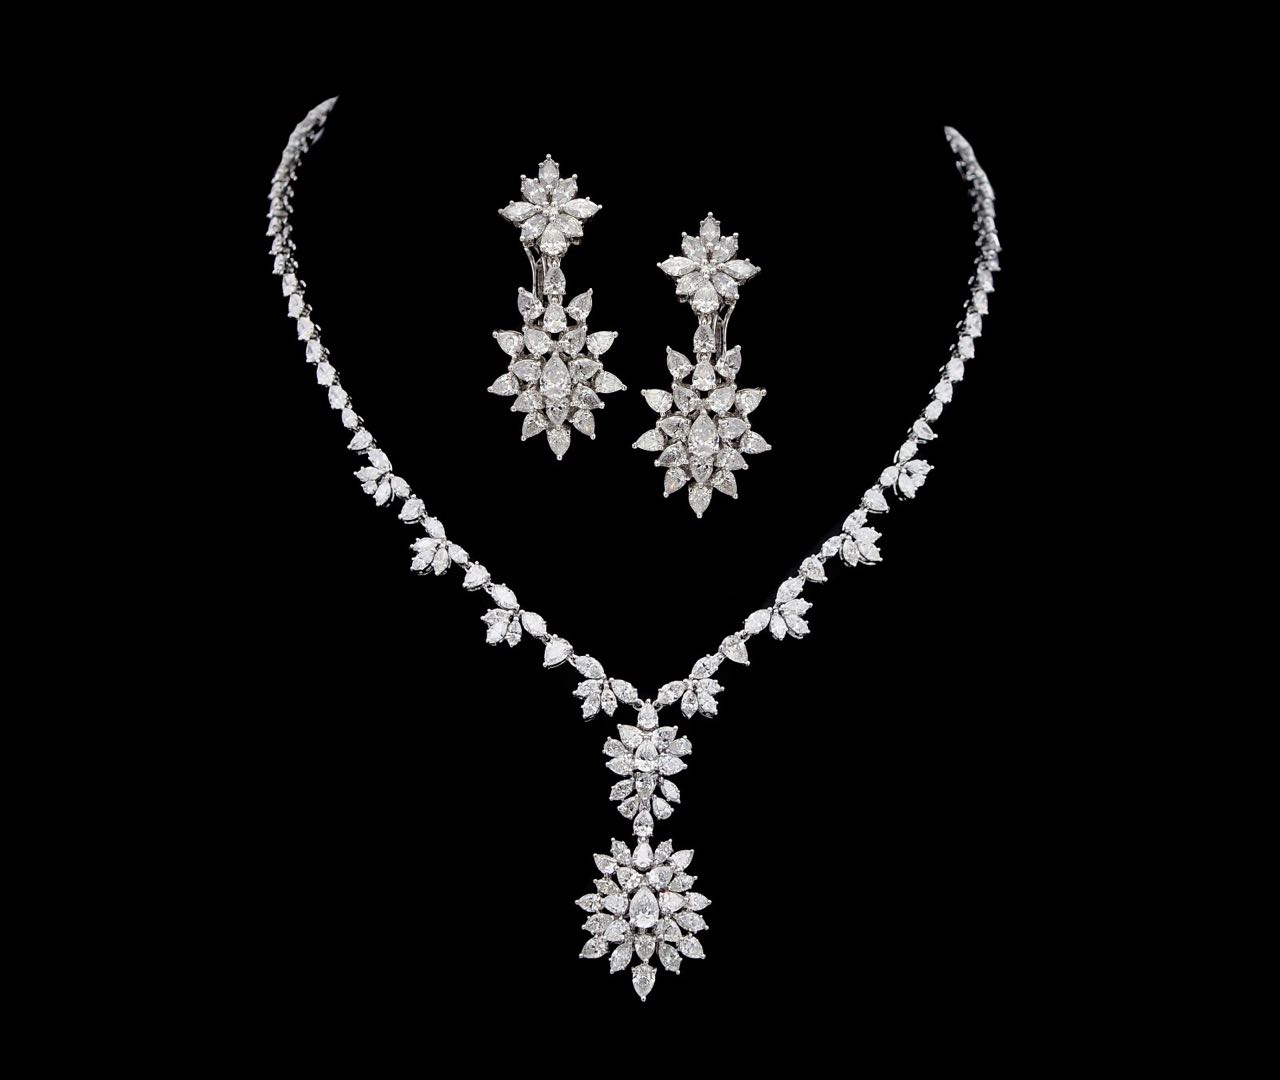 Diamond necklace and earring set